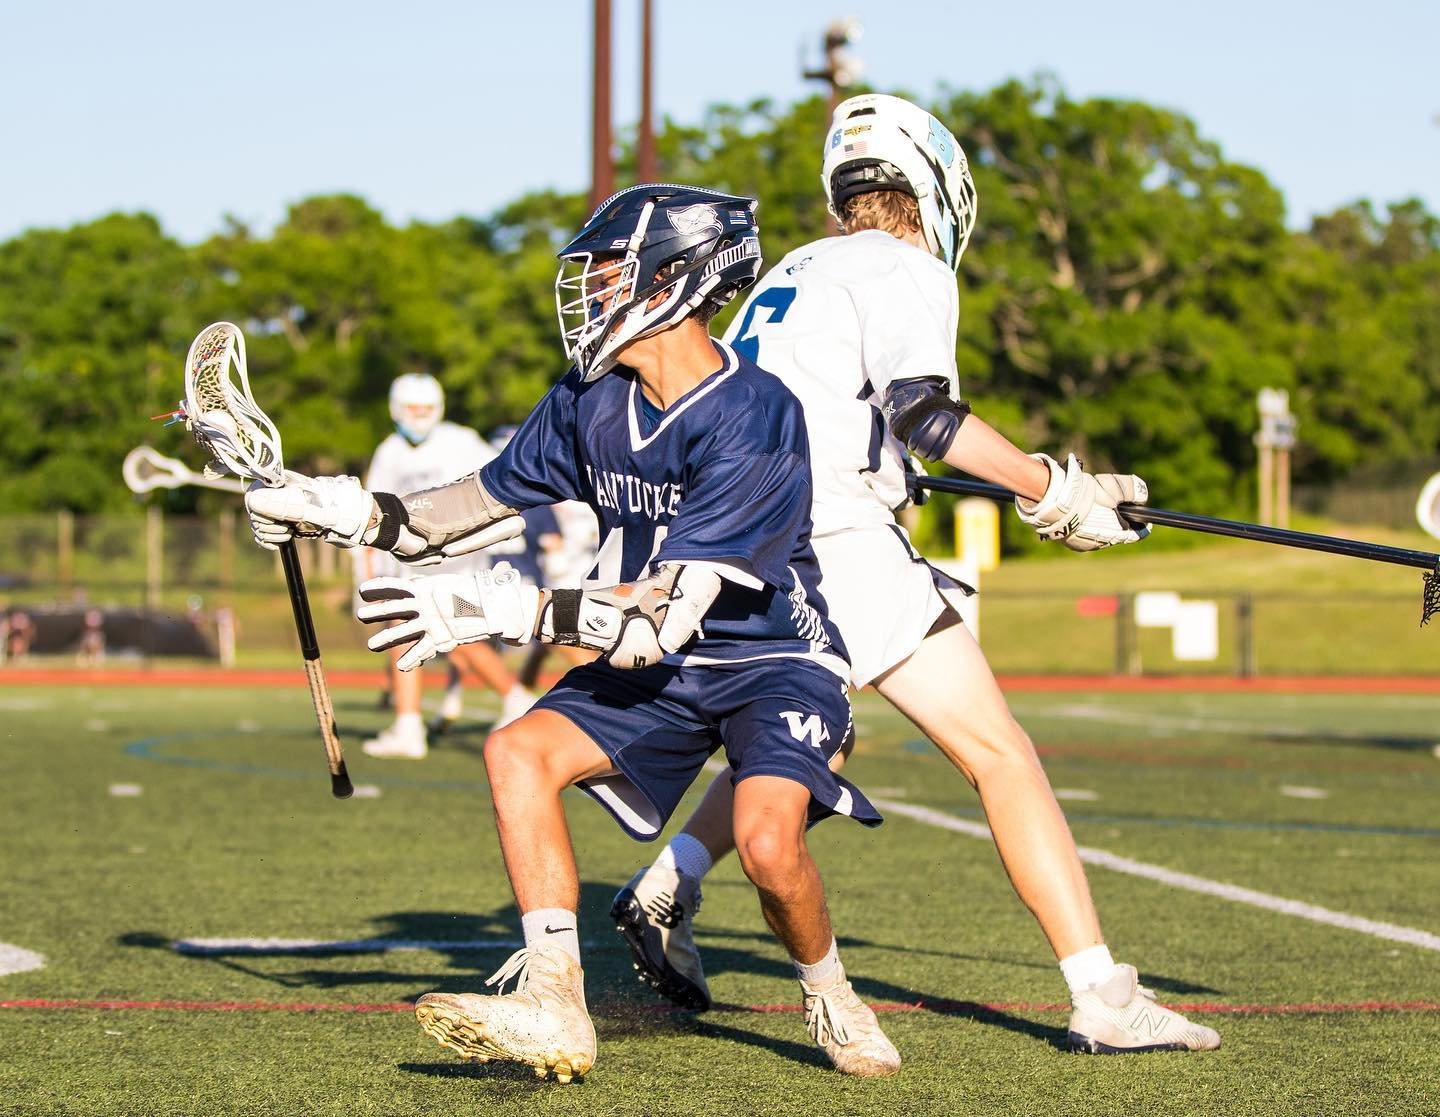 The boys lacrosse team lost 8-2 to top-seeded Sandwich in the Div. 4 state quarterfinals Tuesday.